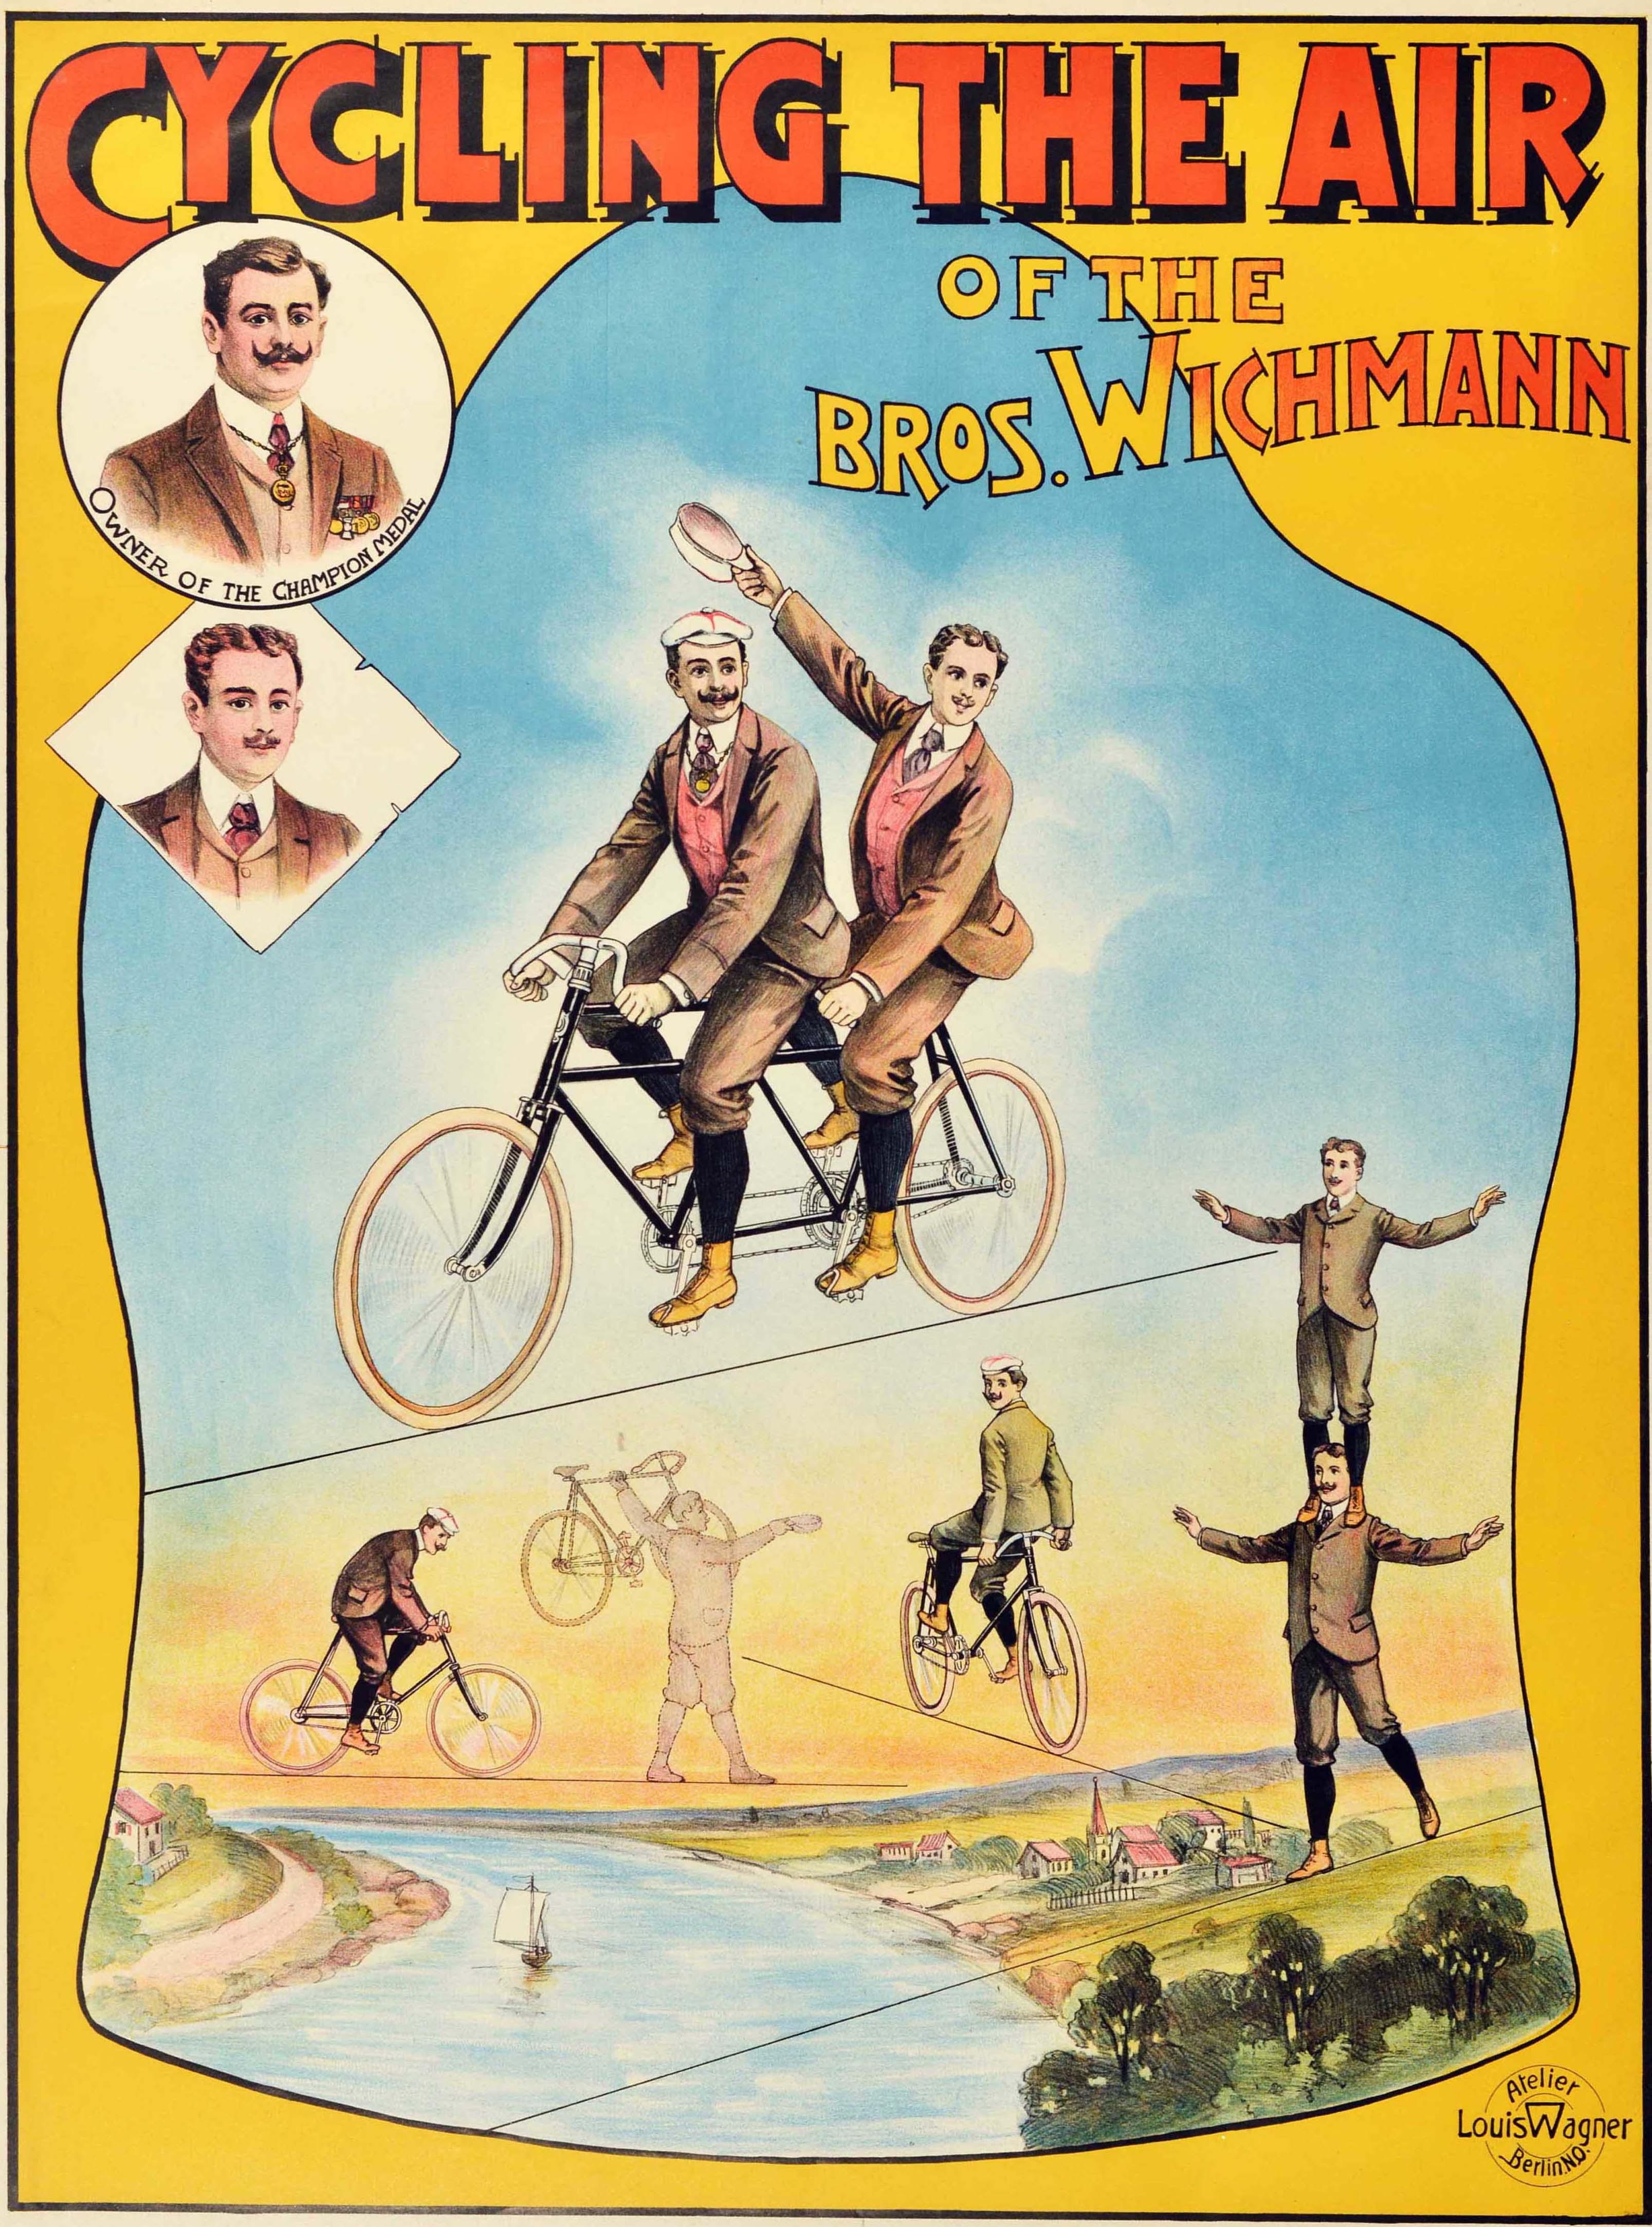 Original antique circus advertising poster - Cycling The Air of the Bros. Wichmann - featuring a colourful design depicting two men performing tricks on their bikes including riding a tandem over a balancing rope and one riding a bicycle backwards,